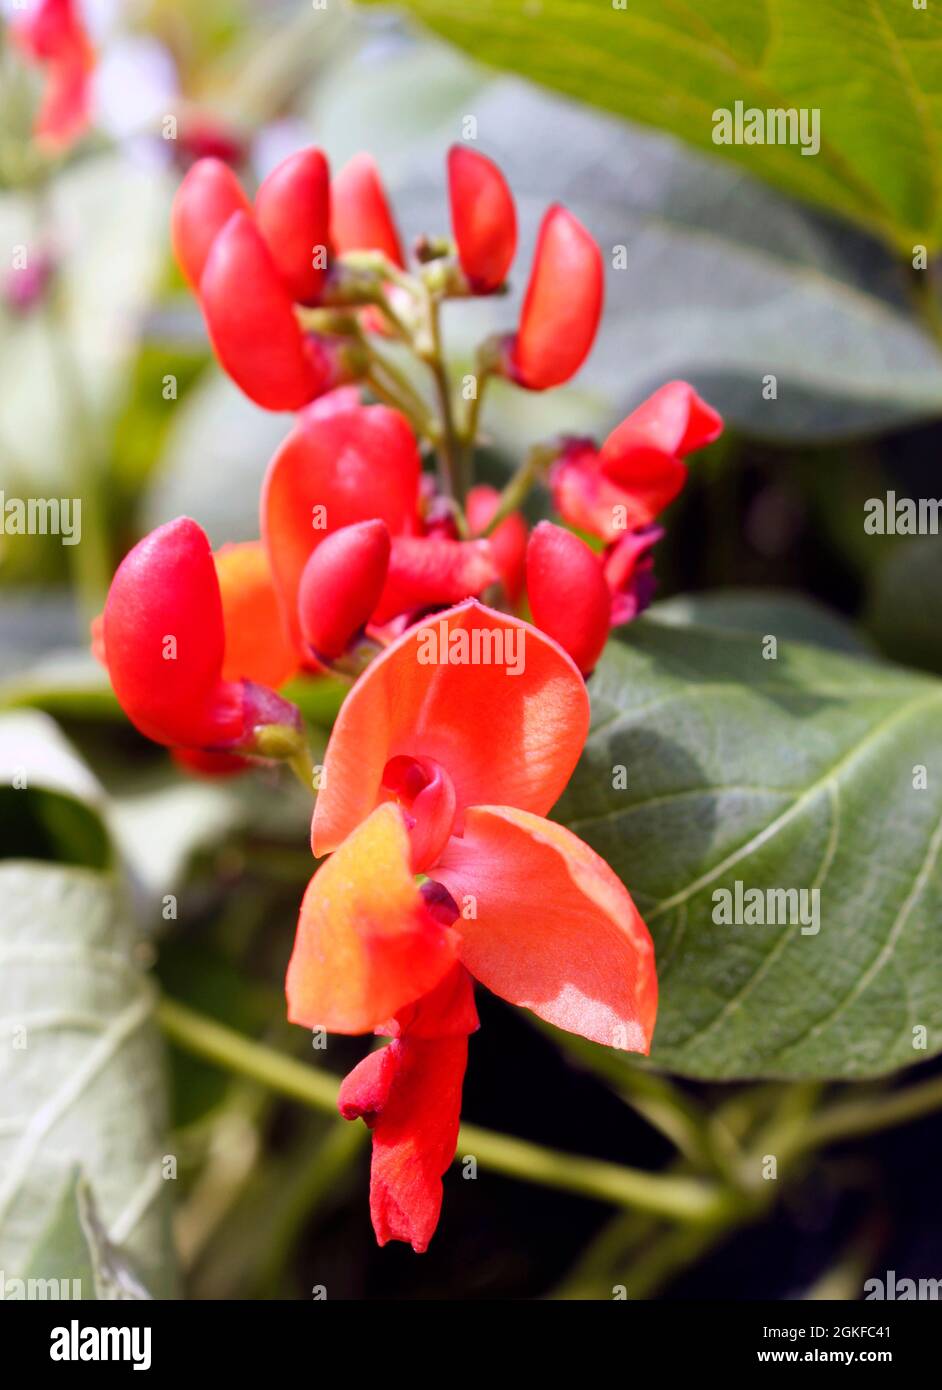 Clusters of bright red flowers growing on Scarlet Emperor (Phaseolus coccineus) runner bean plants Stock Photo